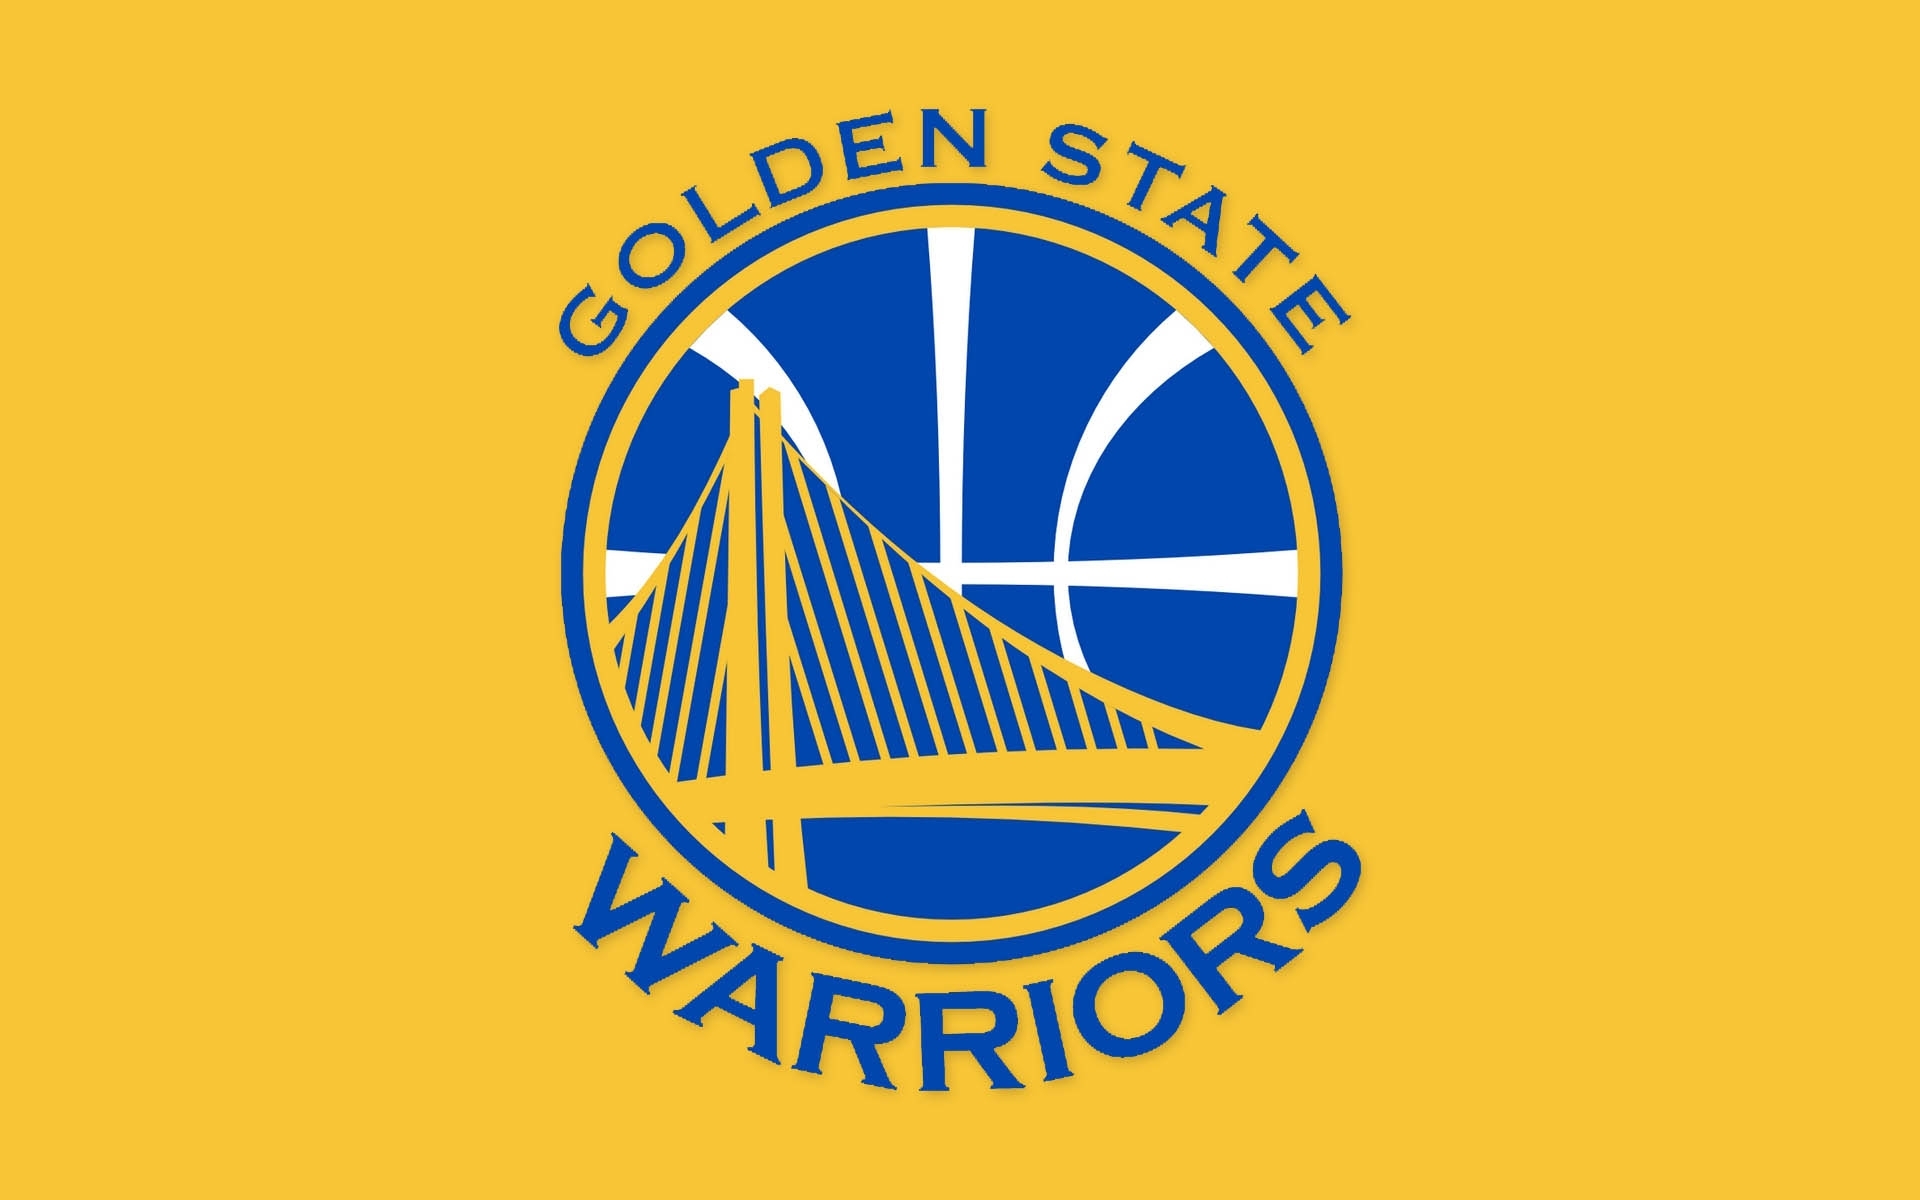 10 New Golden State Warriors Logo Hd FULL HD 1920×1080 For PC Background